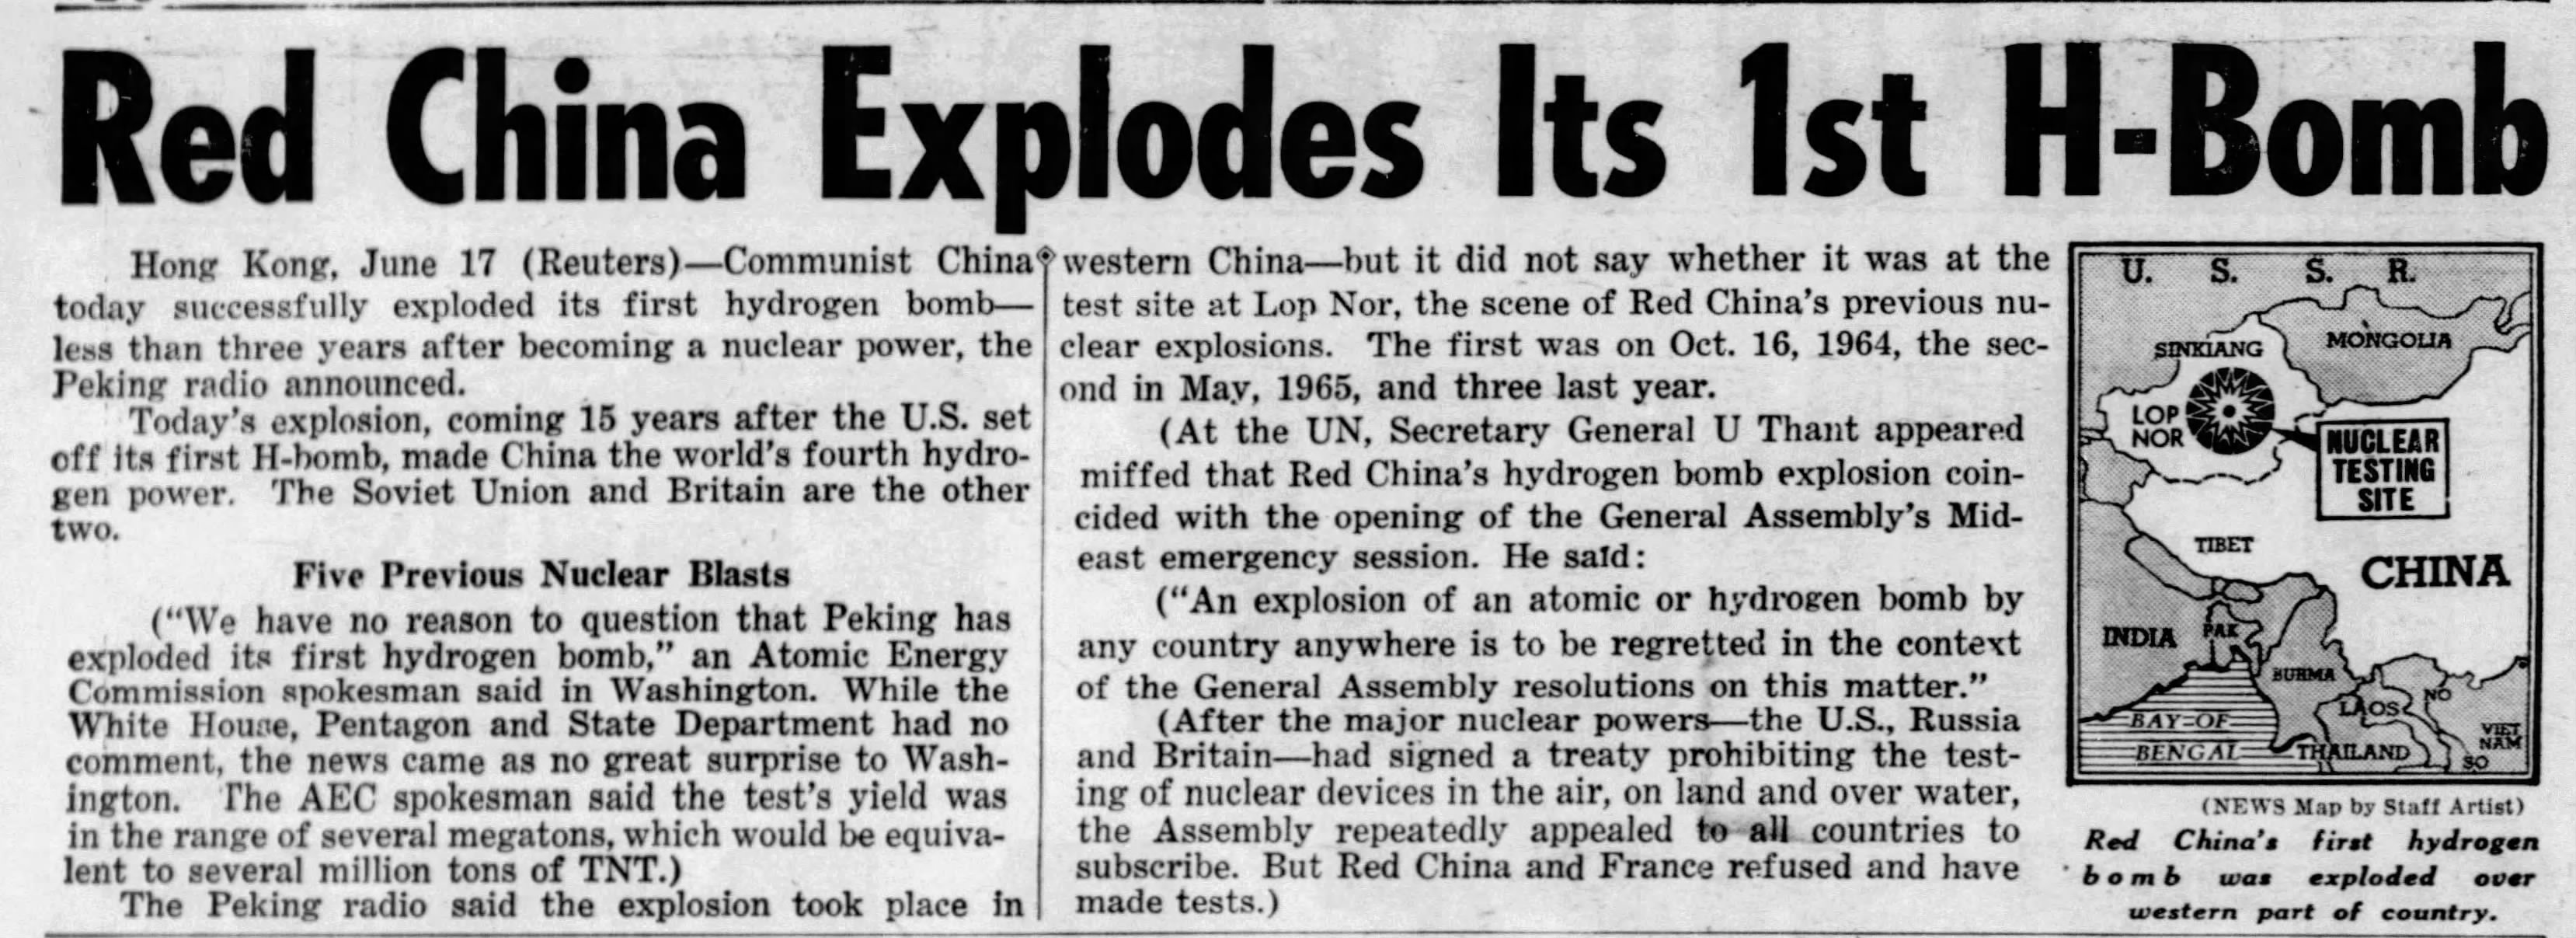 Photo of newspaper. Headline reads "Red China Explodes Its 1st H-Bomb"